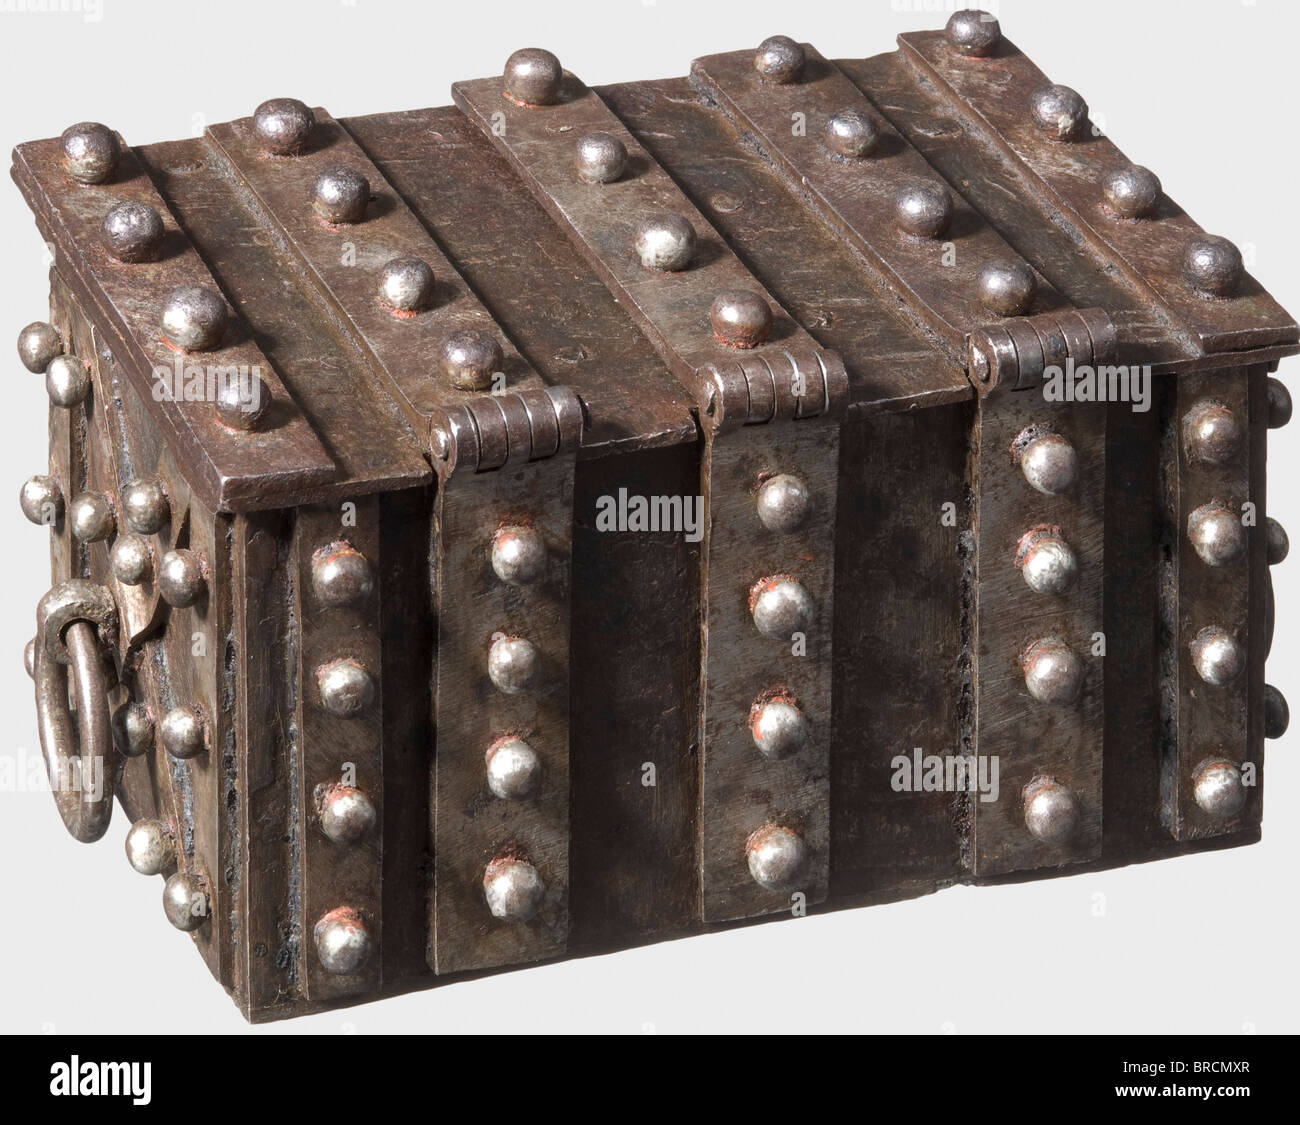 A Nuremberg small strongbox, ca. 1540 Rectangular box made of forged iron sheets. Surrounded by massive reinforcement straps with stud rivets. The hinged lid with three hasps and small triangular locks. On both sides moveable handle rings. Elaborate lock mechanism with two secret locks. On the front a concealed key hole with secret release device. The inside with intricately worked locking mechanism, which reveals the central strap of the lid. On the front a second secret mechanism: when a rivet is turned, a double latch is moved. The lid with elaborate locking, Stock Photo